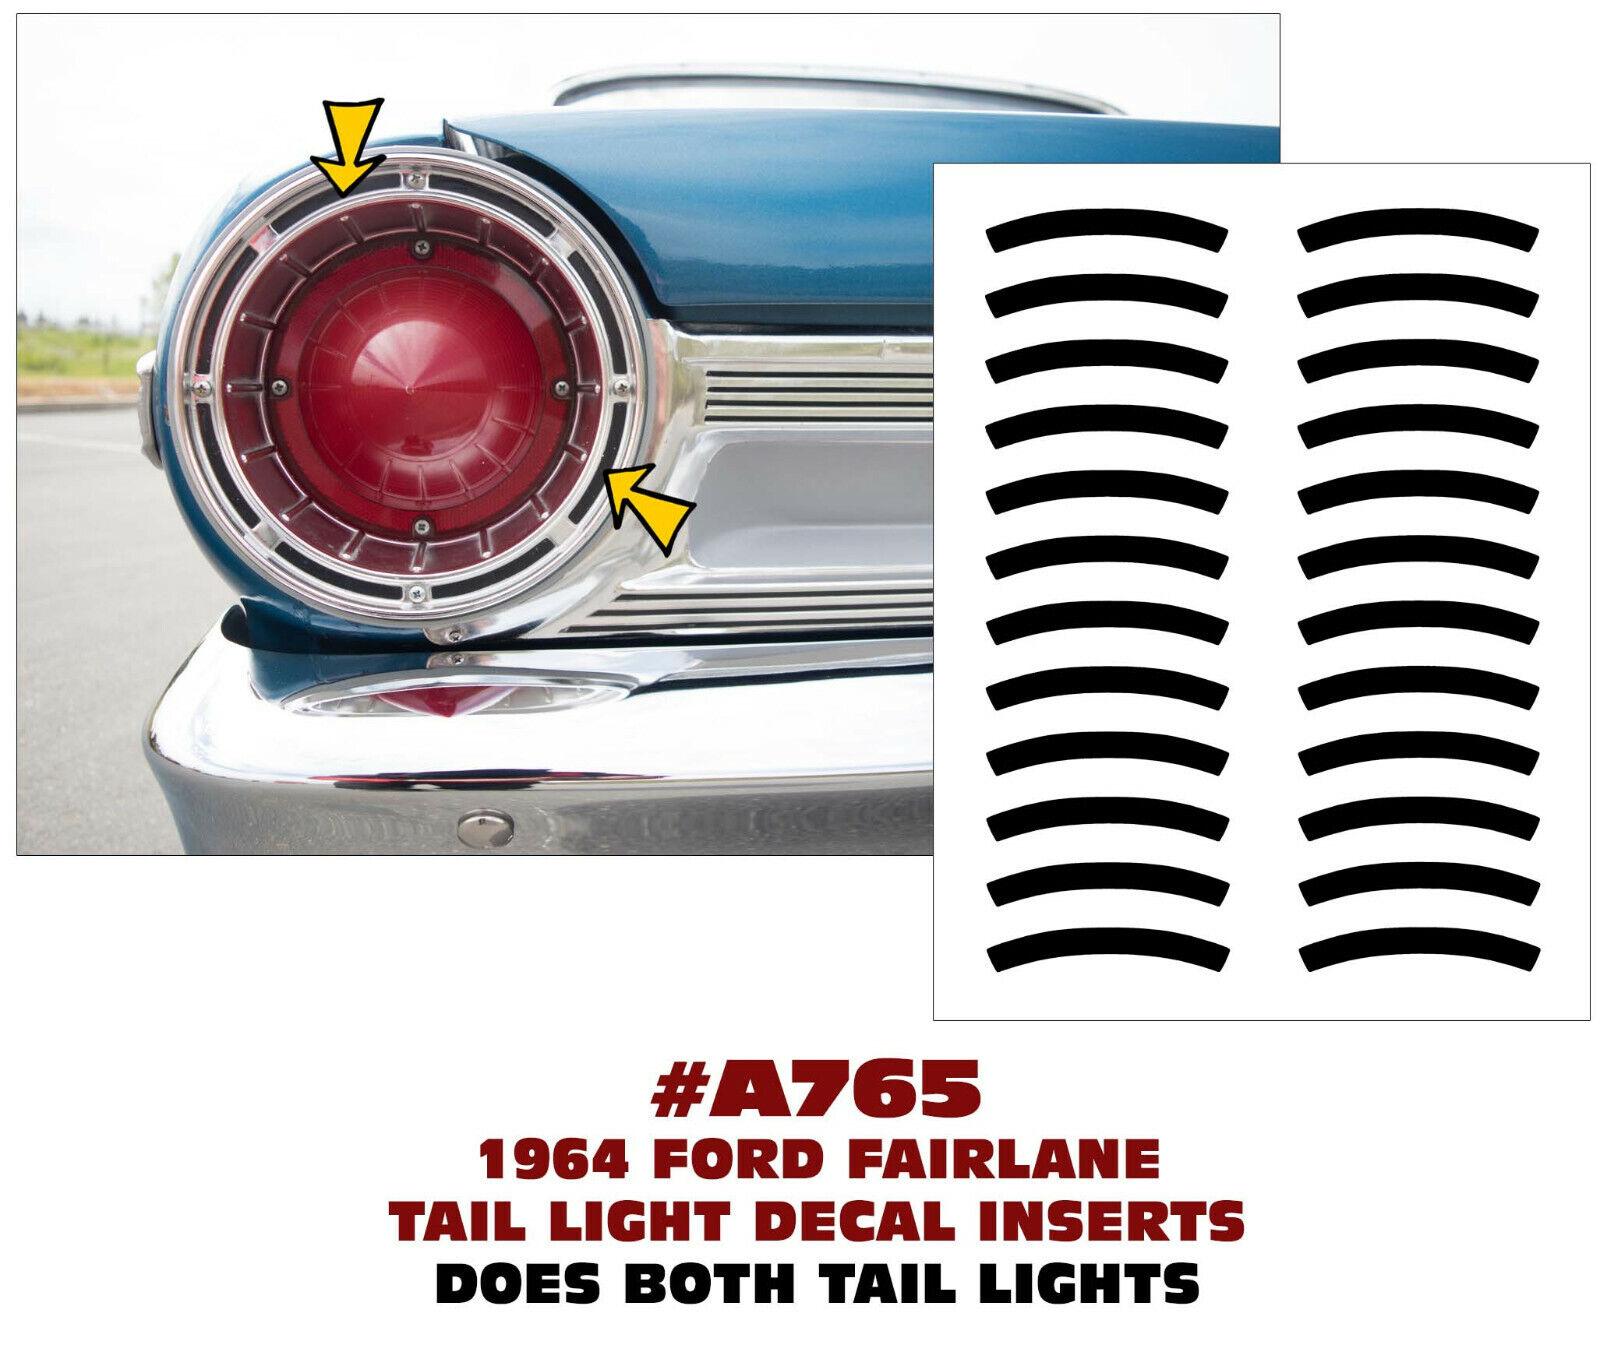 A765 1964 FORD FAIRLANE - TAIL LIGHT INSERT DECALS